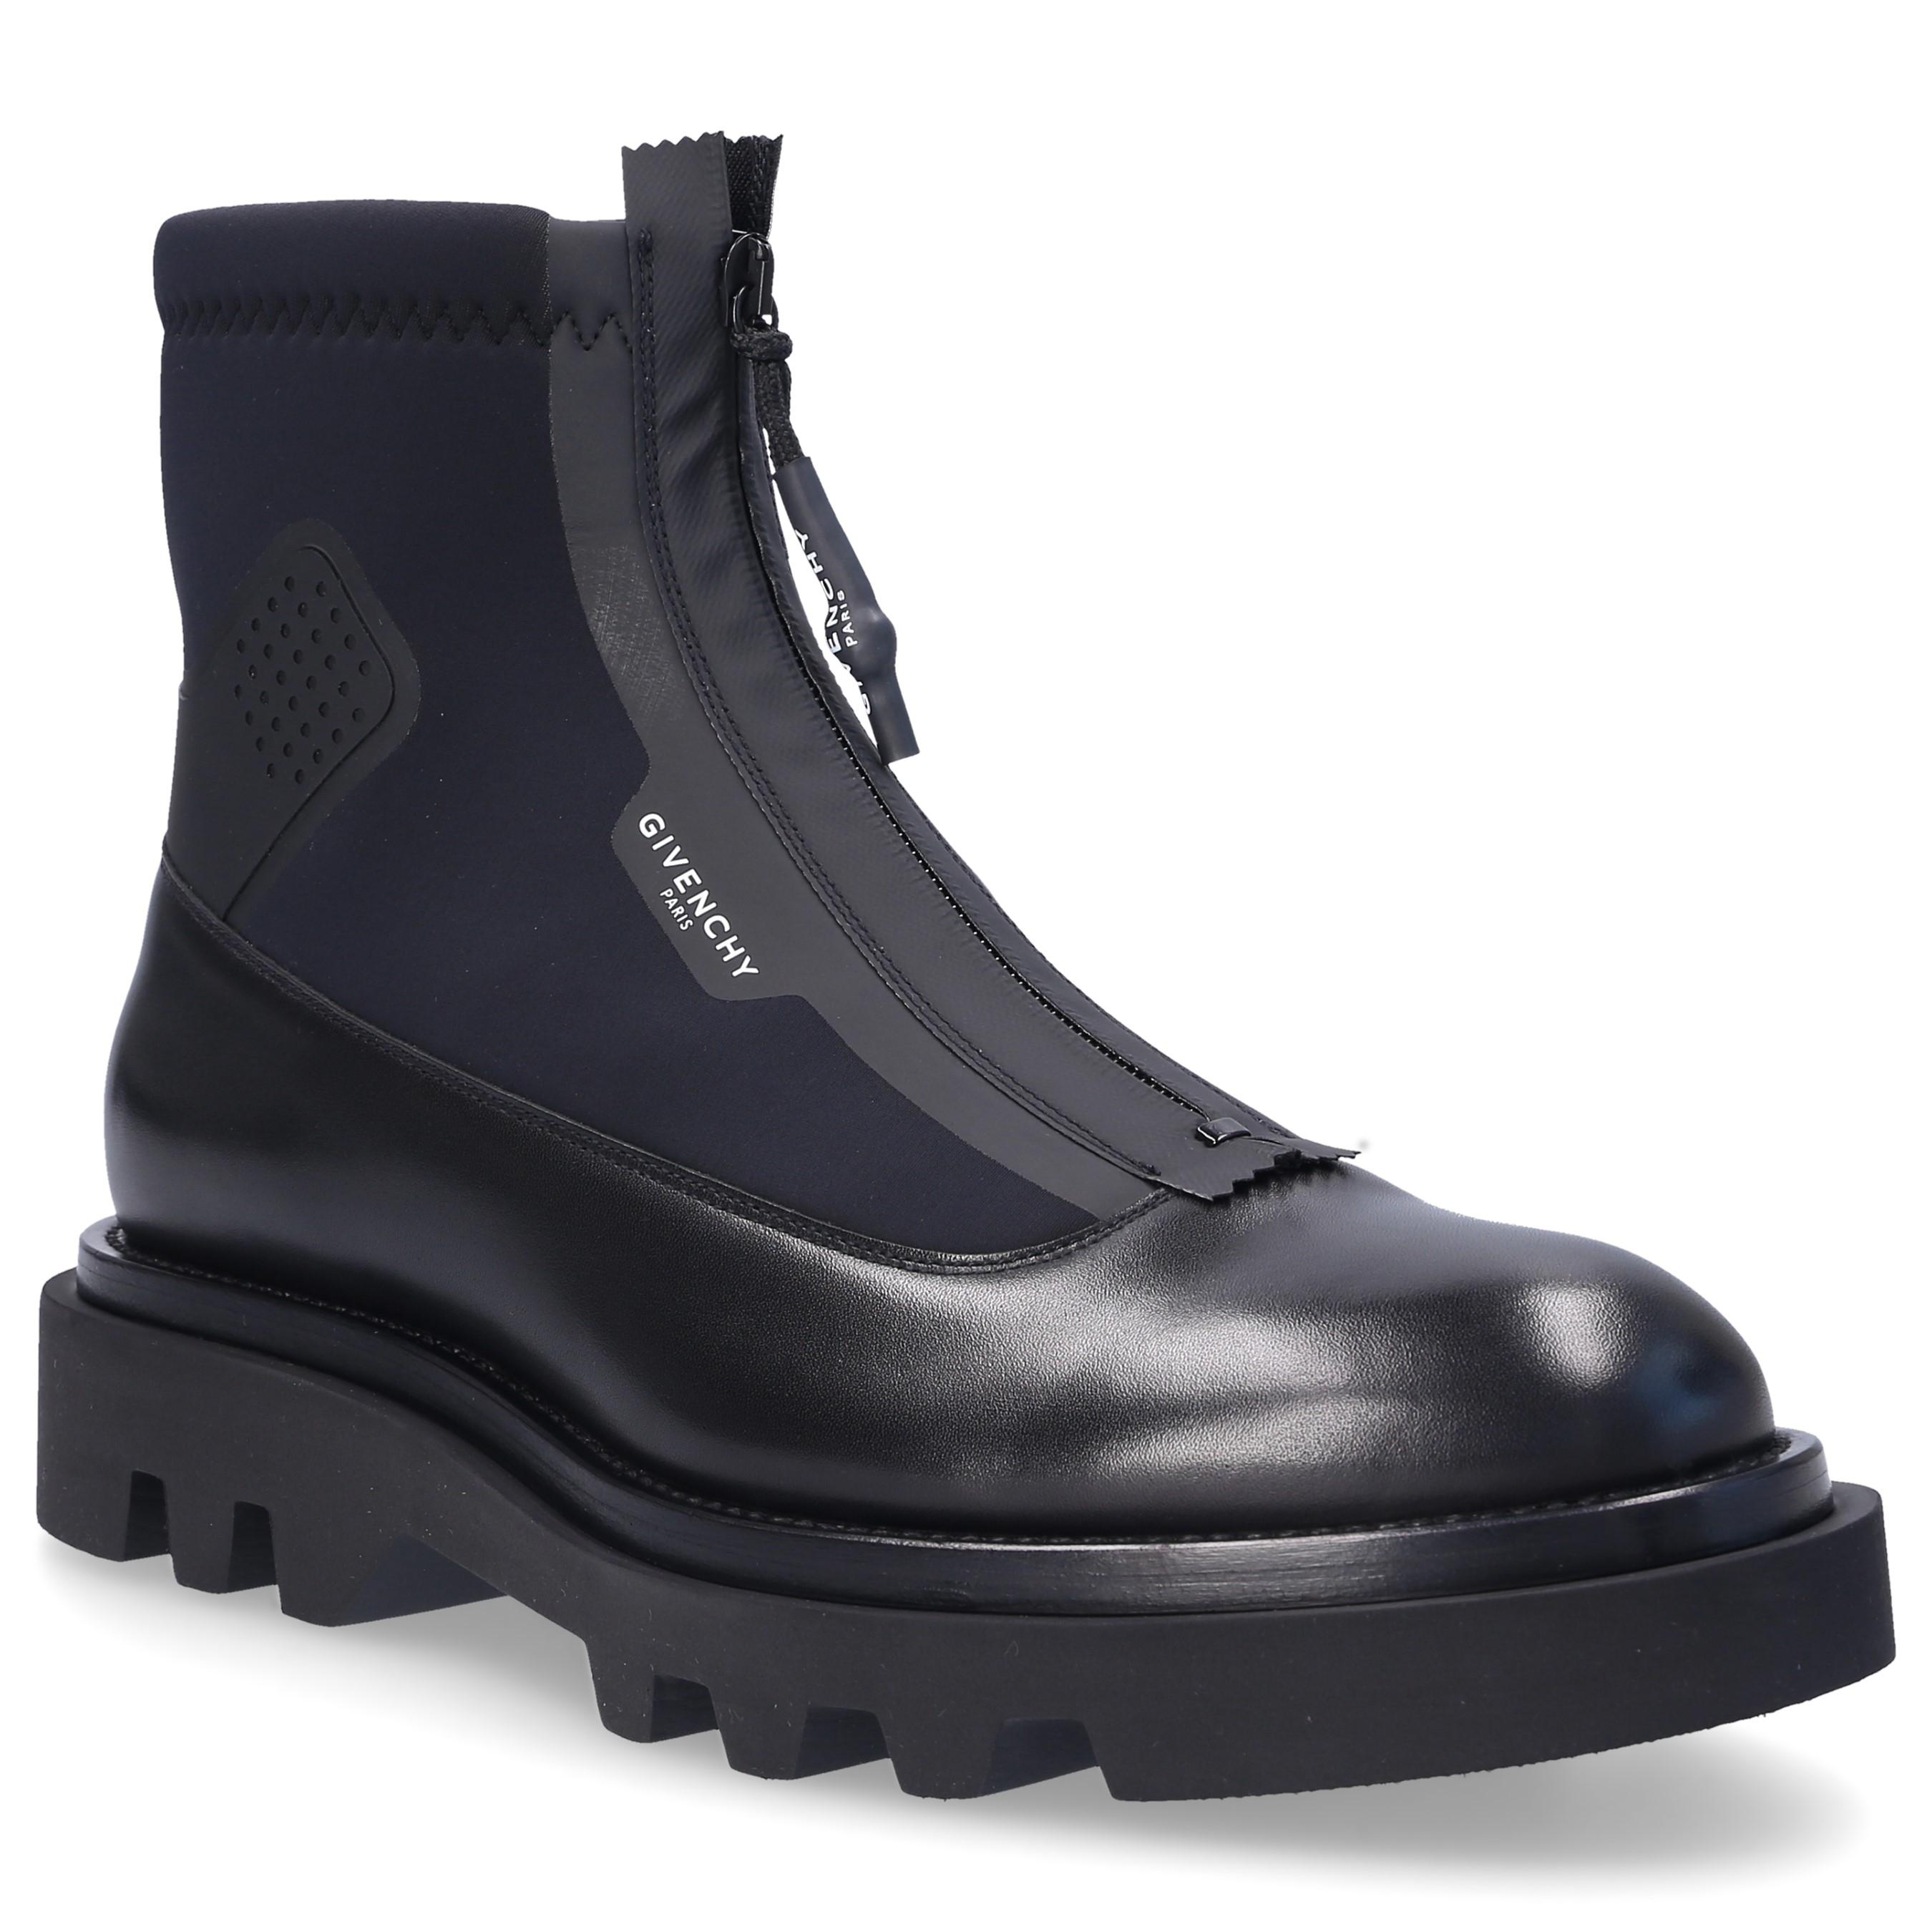 Givenchy Leather Ankle Boots Combat Boot in Black for Men - Lyst